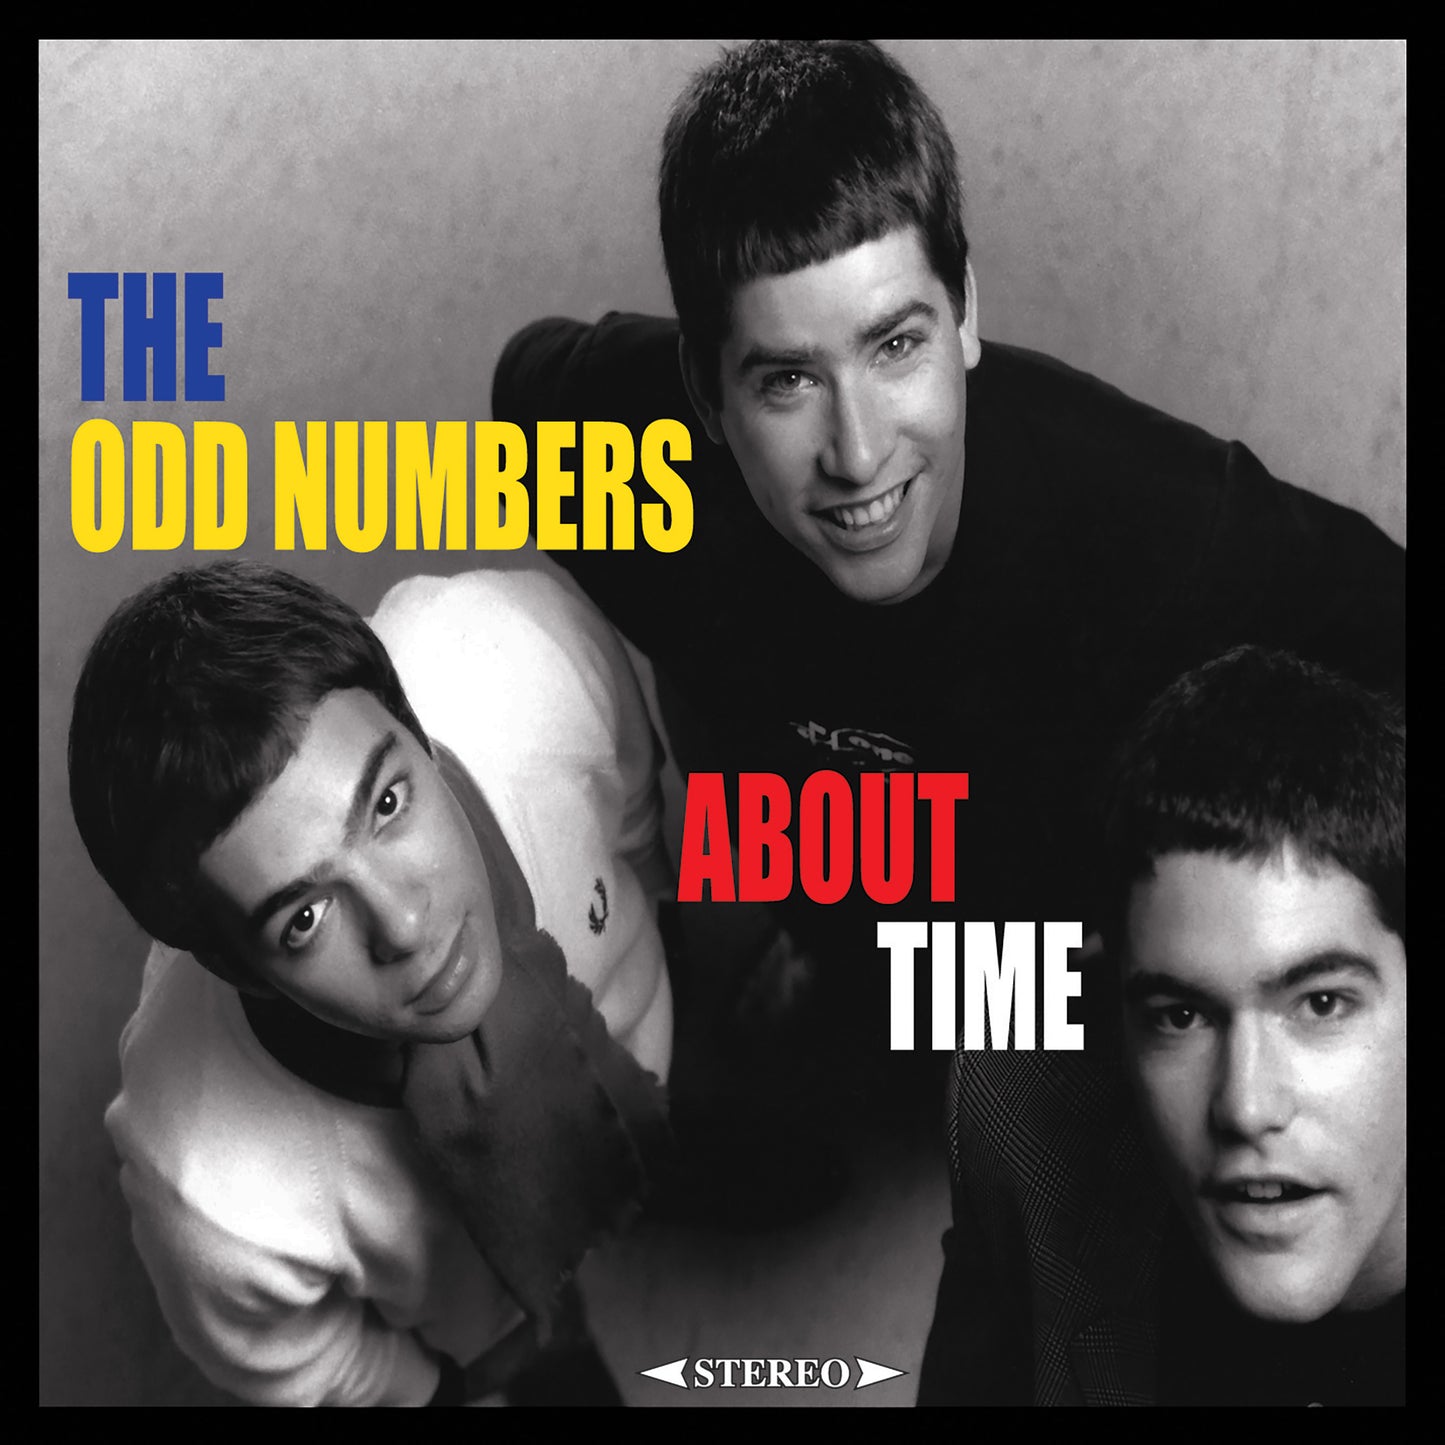 The Odd Numbers "About Time" CD